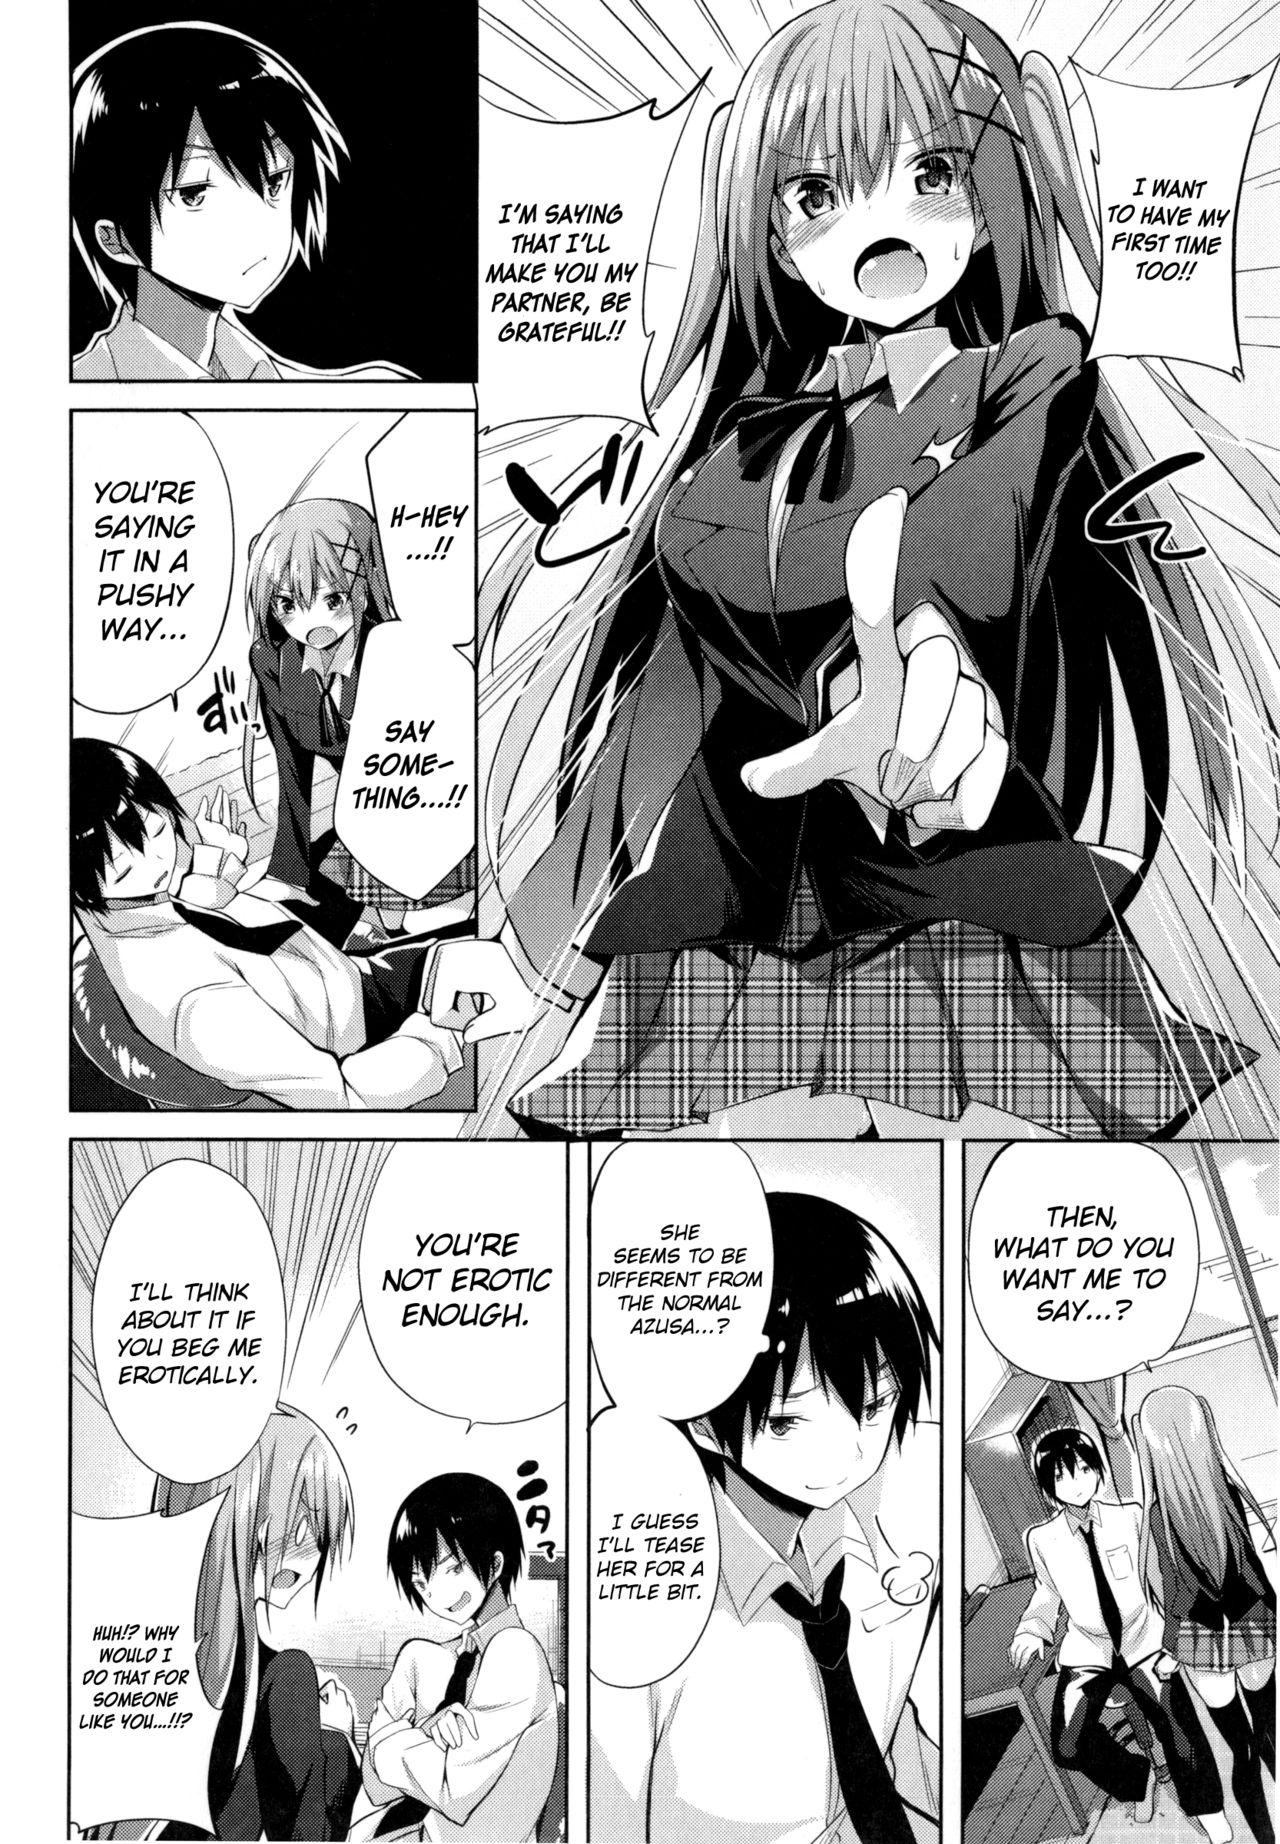 Big Booty Hajimete ga Ii no! | I Want to be Your First! Perfect Porn - Page 4